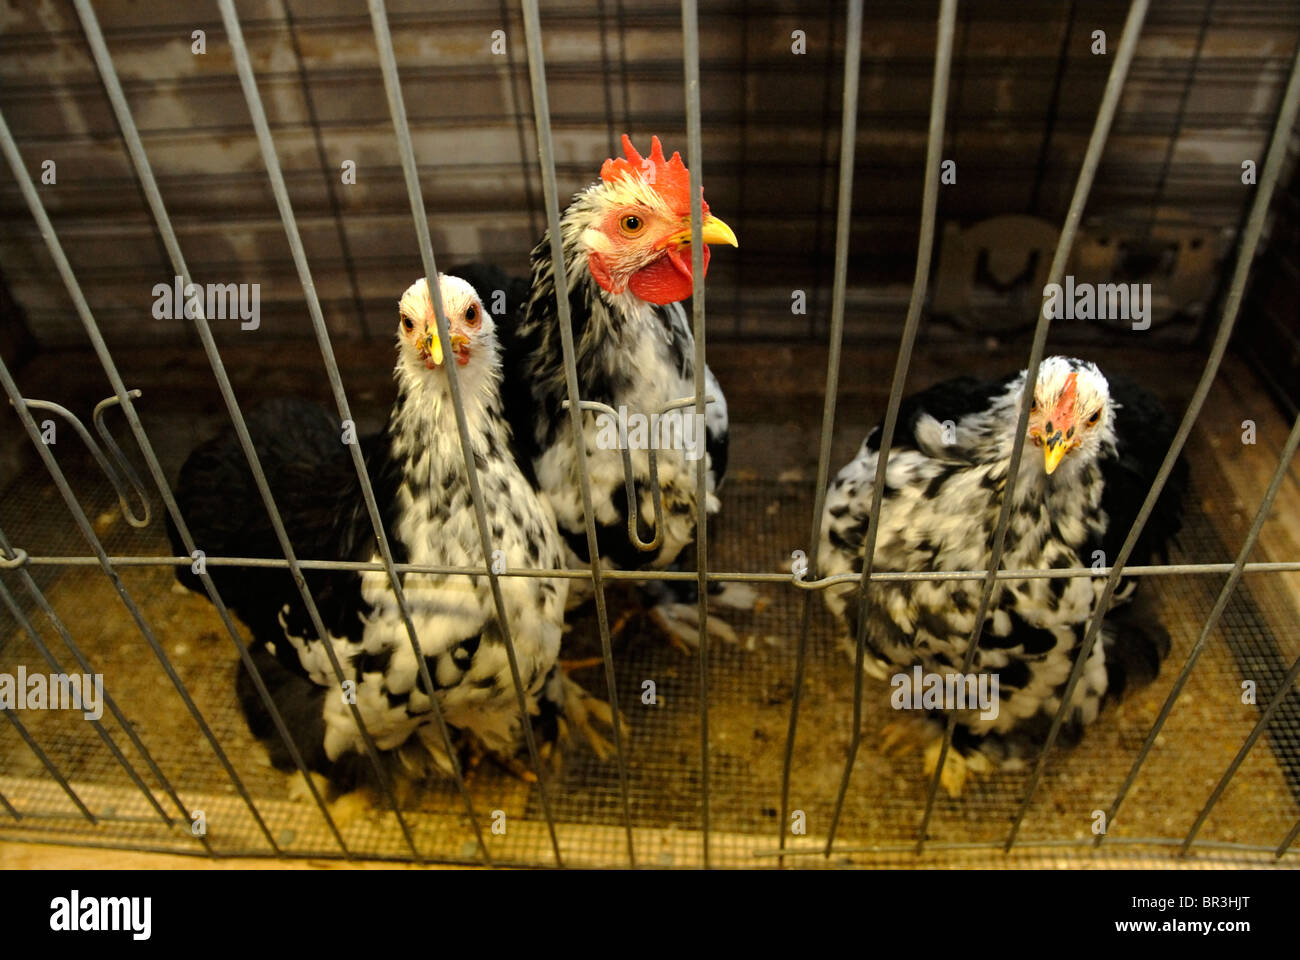 Two hens and a rooster at the county fair. Stock Photo